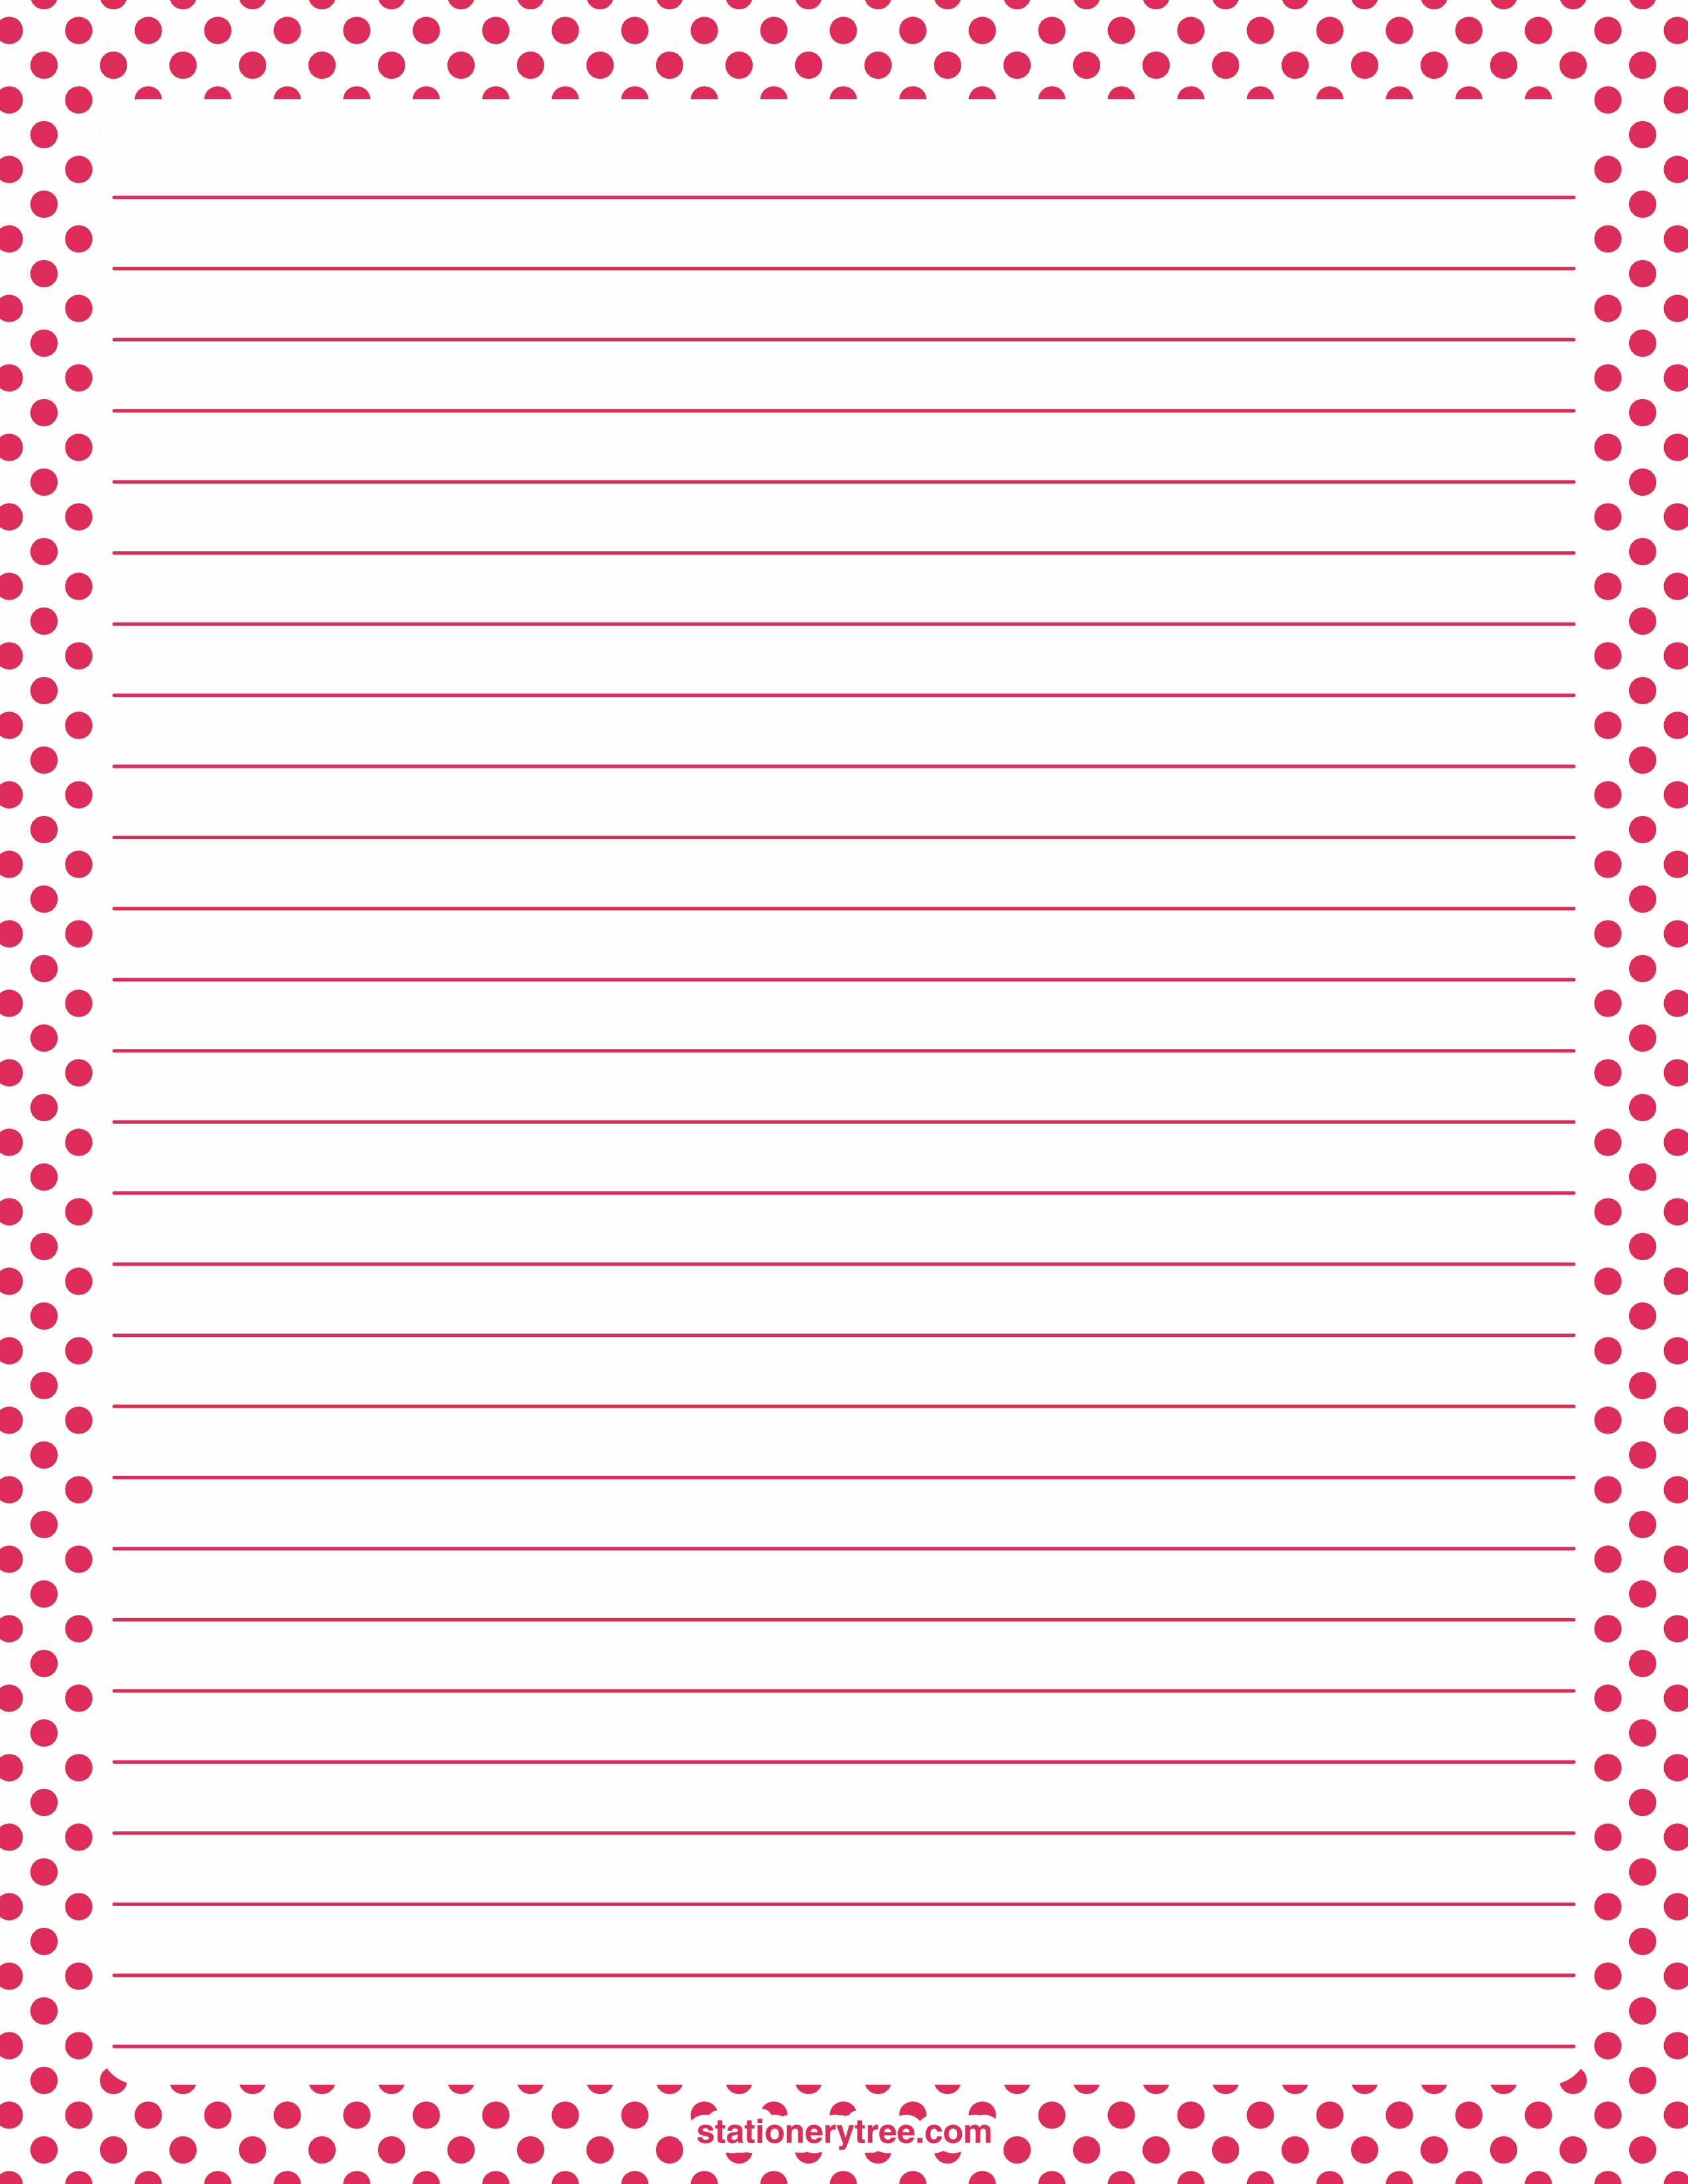 Pinmuse Printables On Stationery At Stationerytree | Free - Free Printable Cloud Stationery